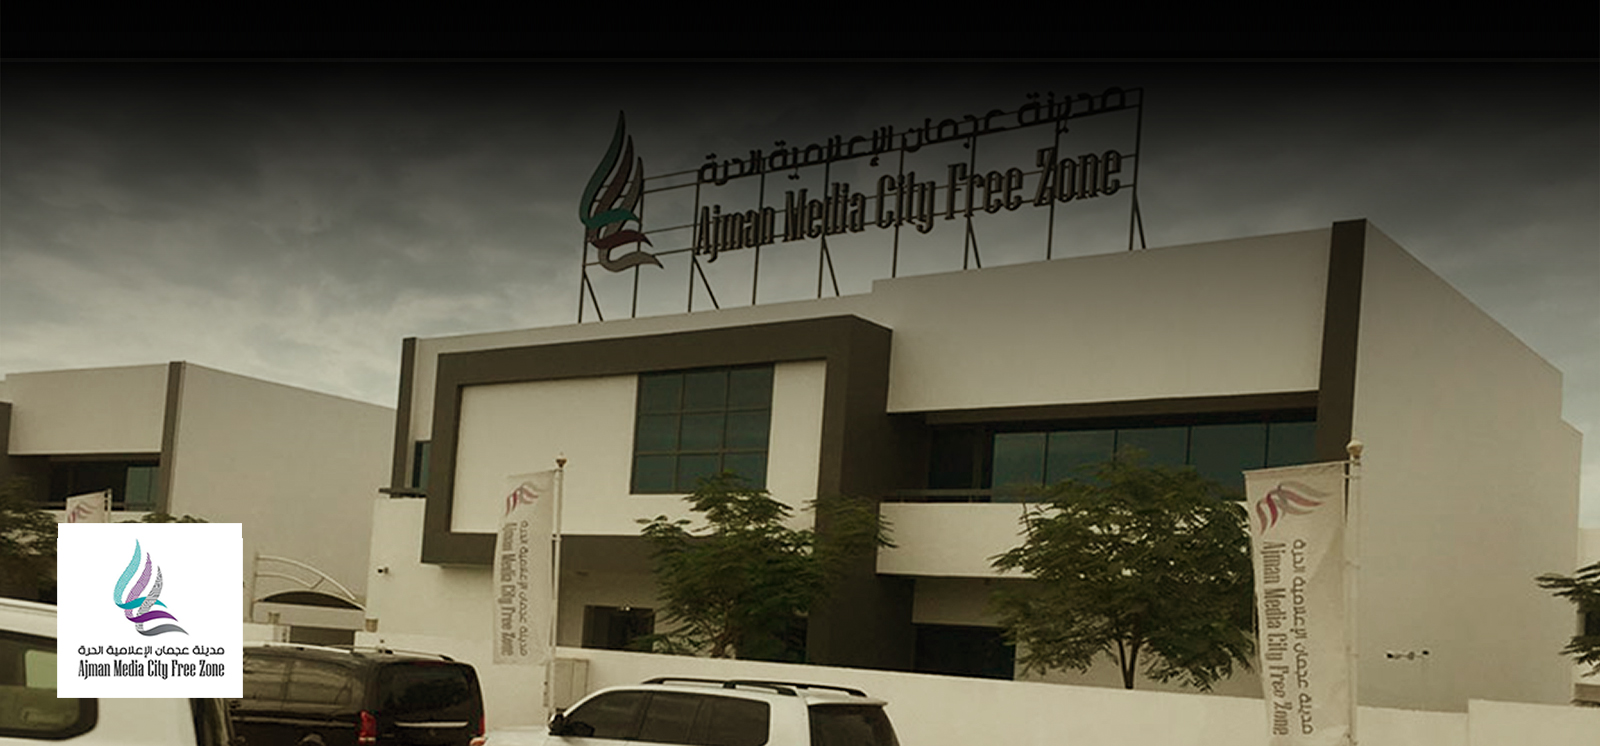 Ajman media city freezone is the place to start your business